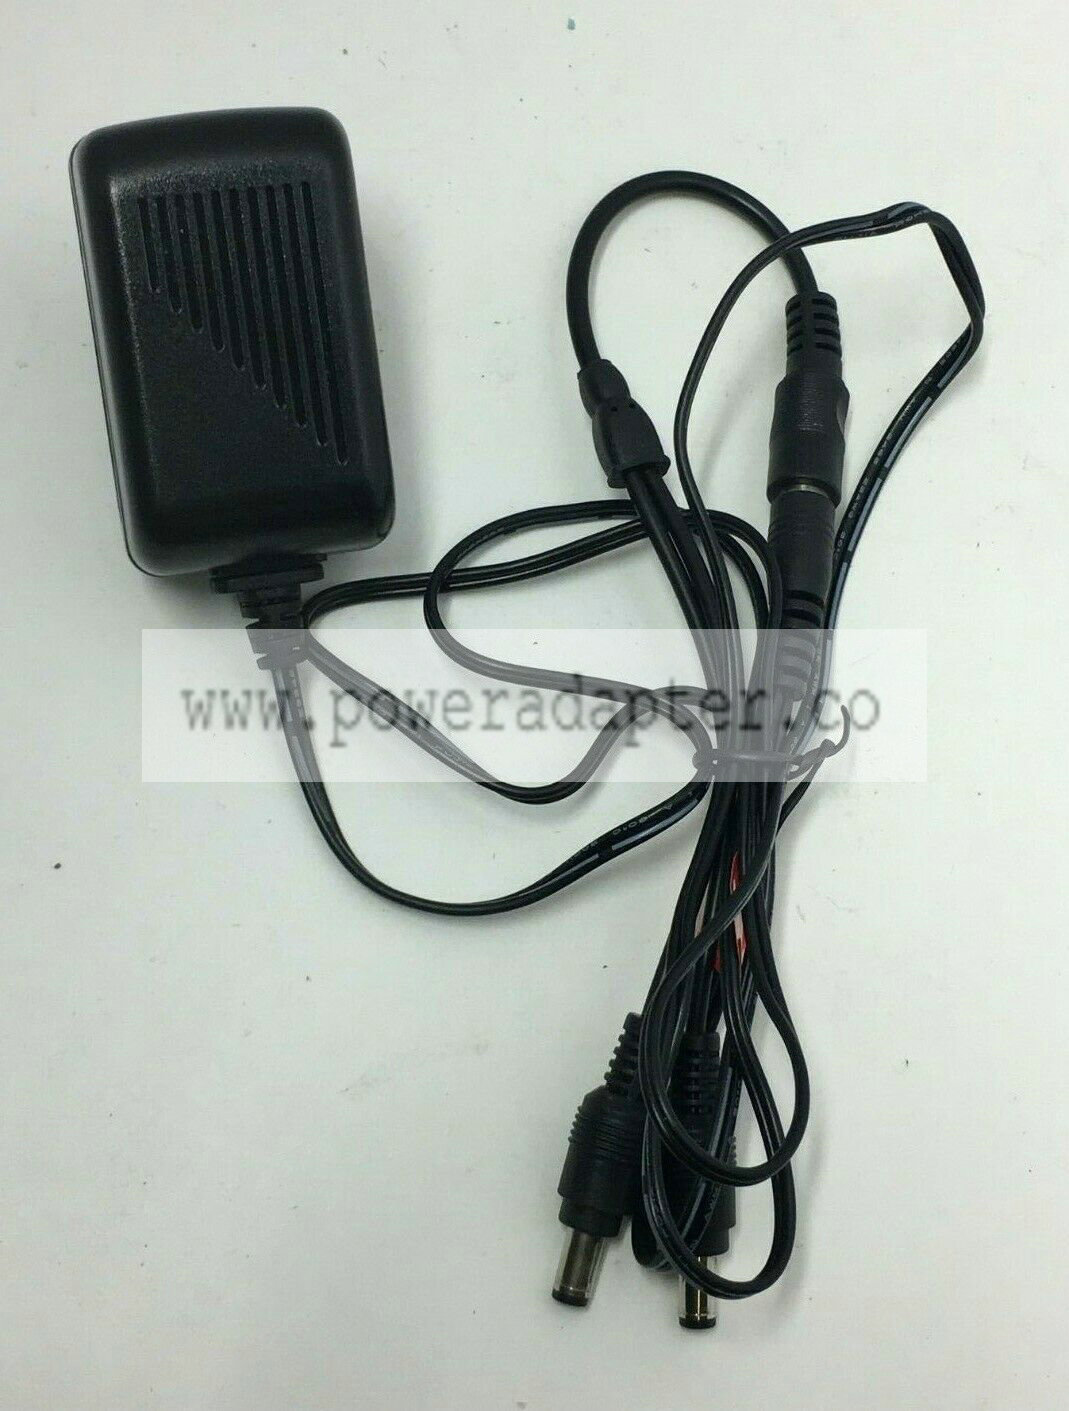 Shenzhen Fujia Appliance Camera Power Supply Switching Adapter With Cable Shenzhen Fujia Appliance Camera Power Suppl